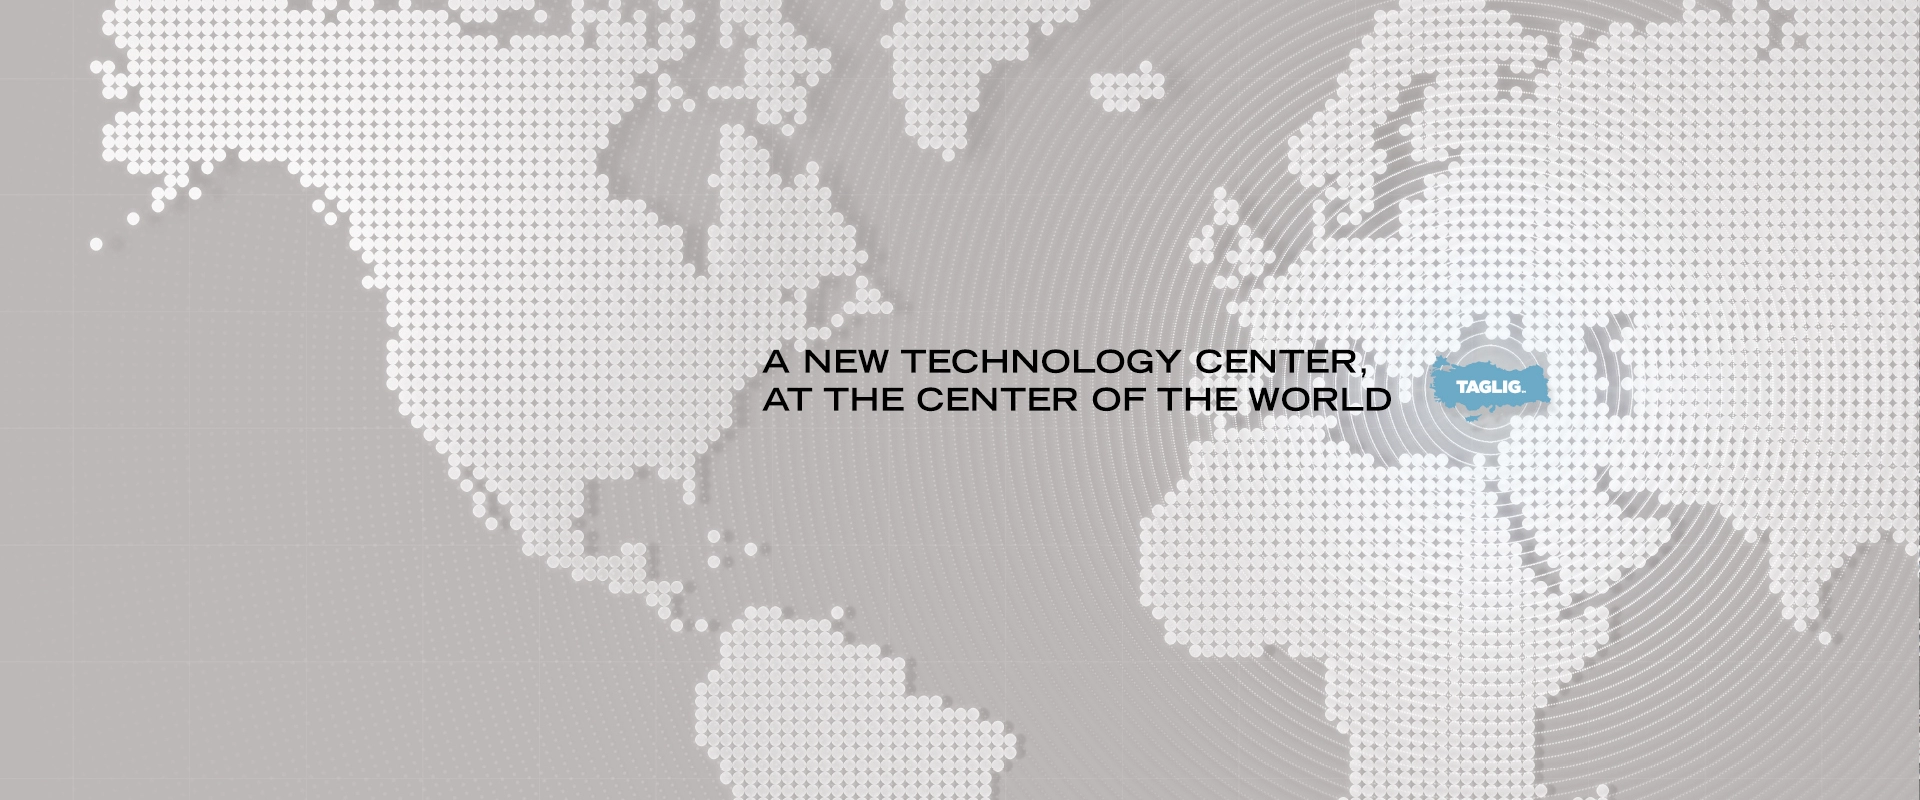 A New technolgy center at the center of the world